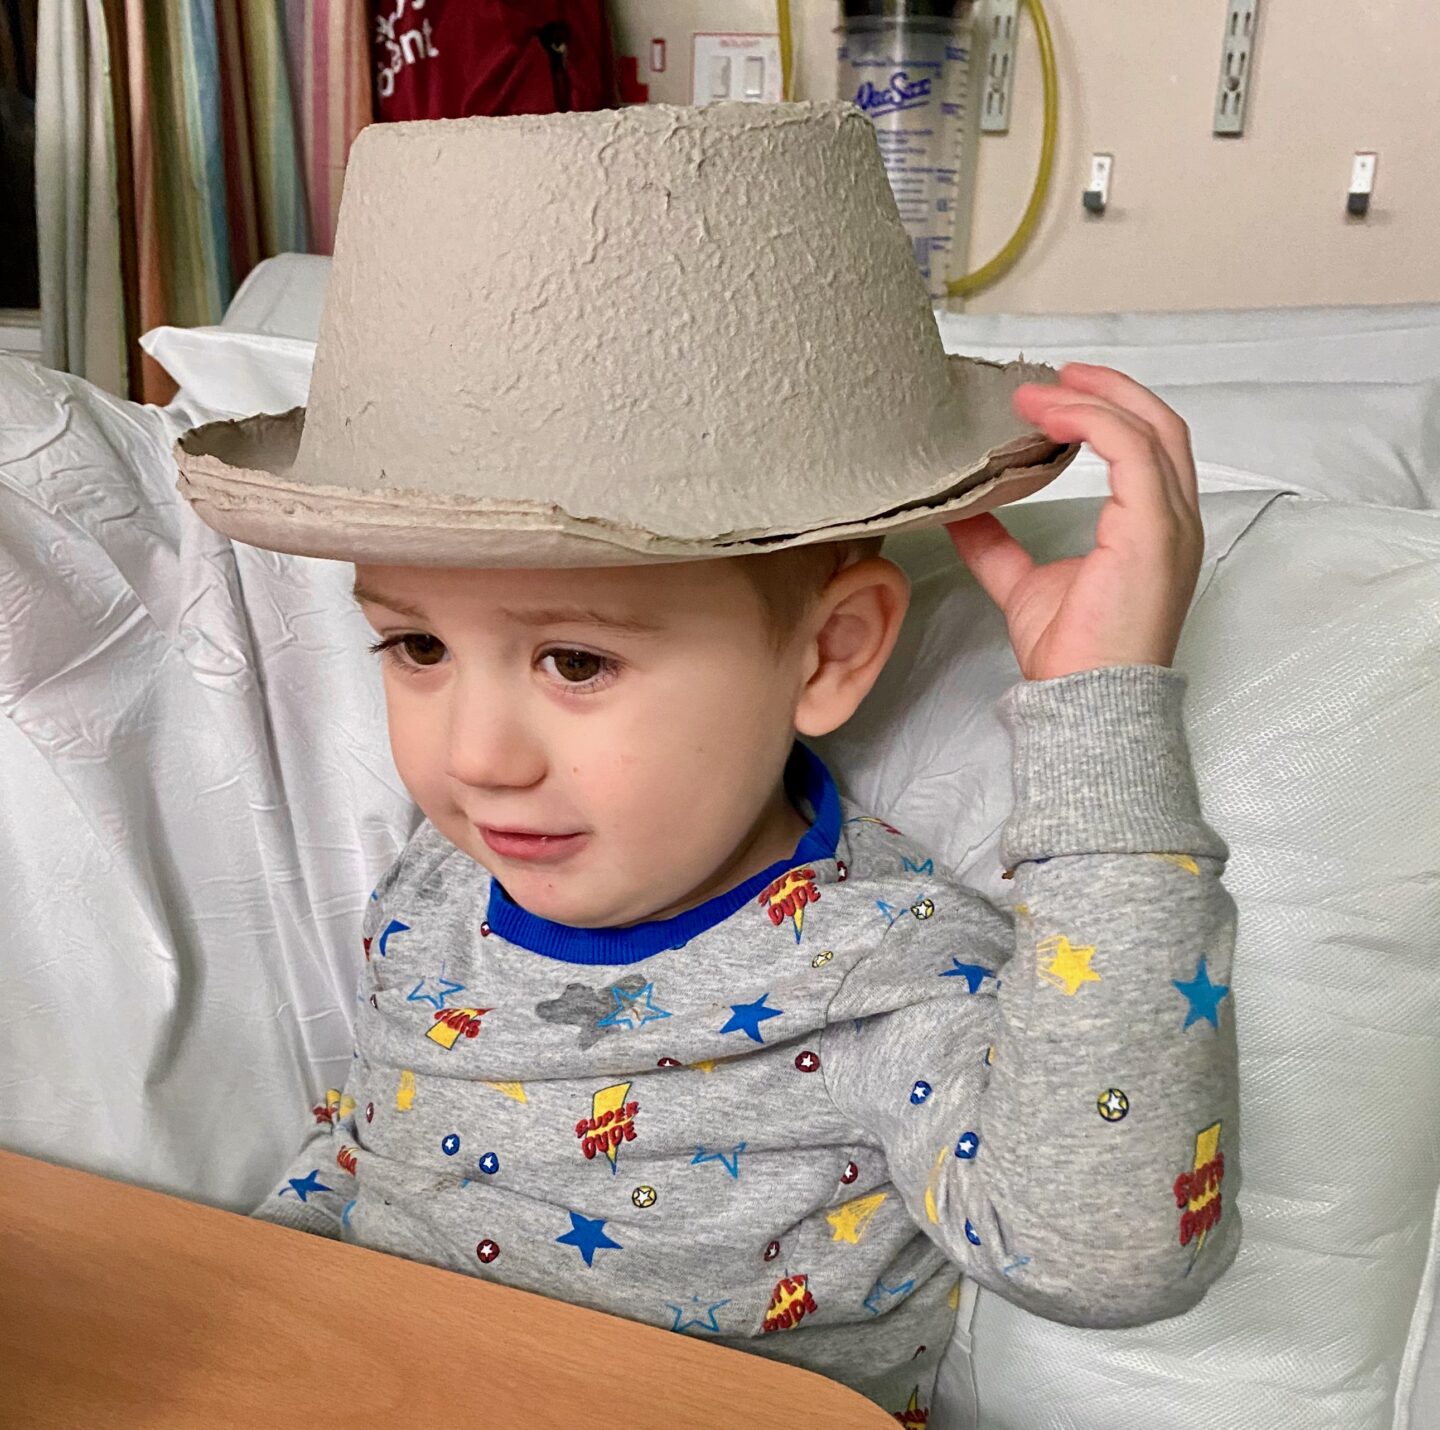 boy with sick bowl on his head 